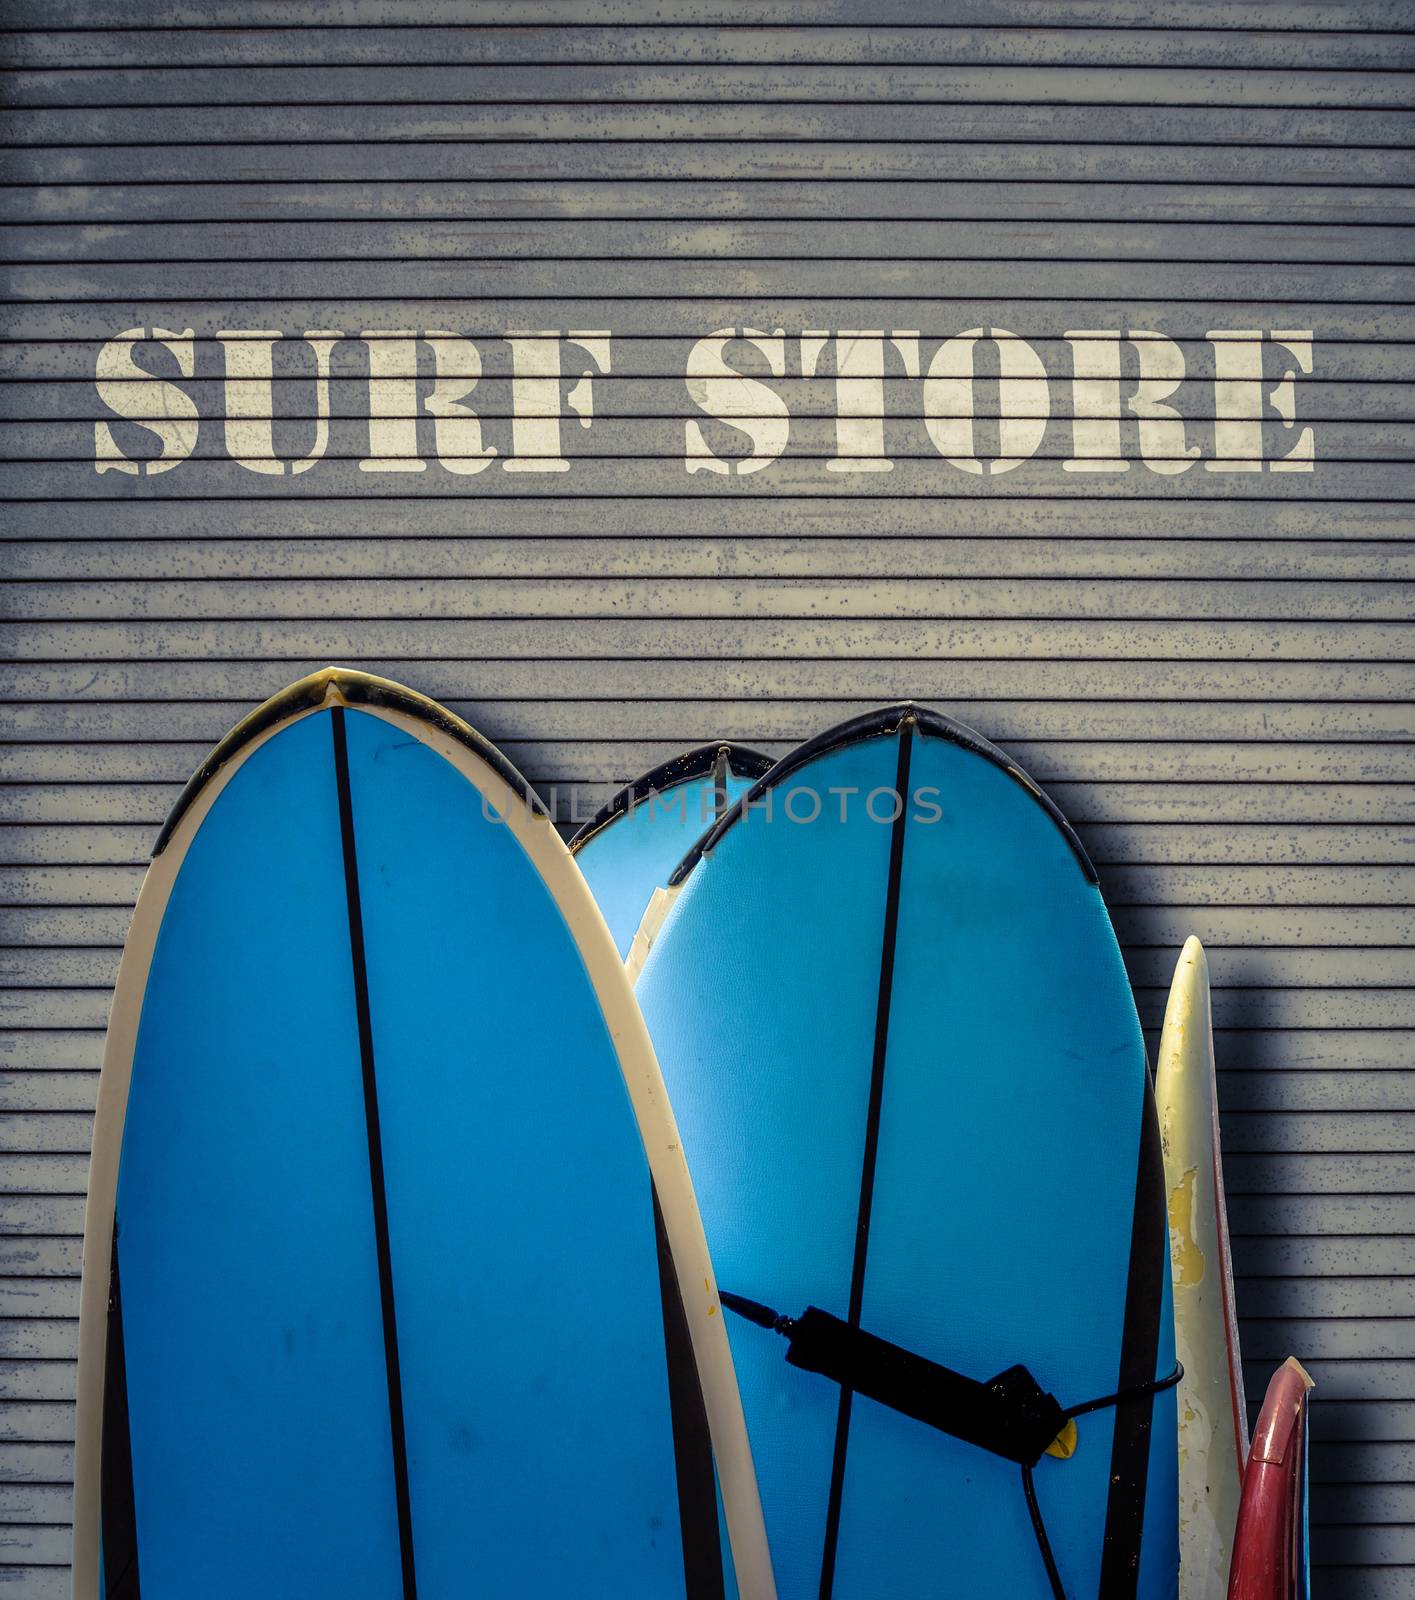 Retro Filtered Surf Store Sign With Blue Surfboards